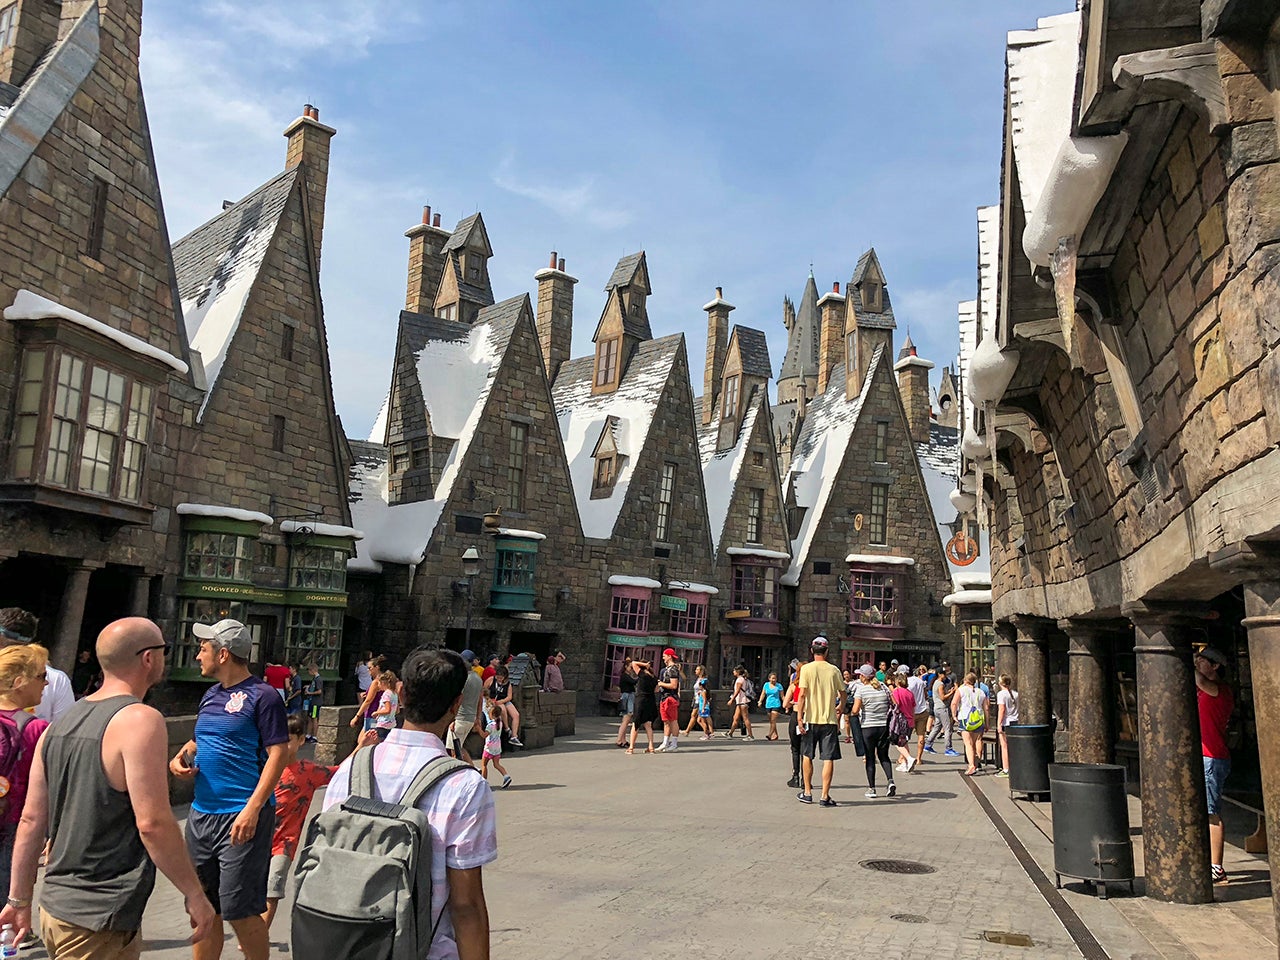 is the vip tour at universal studios hollywood worth it